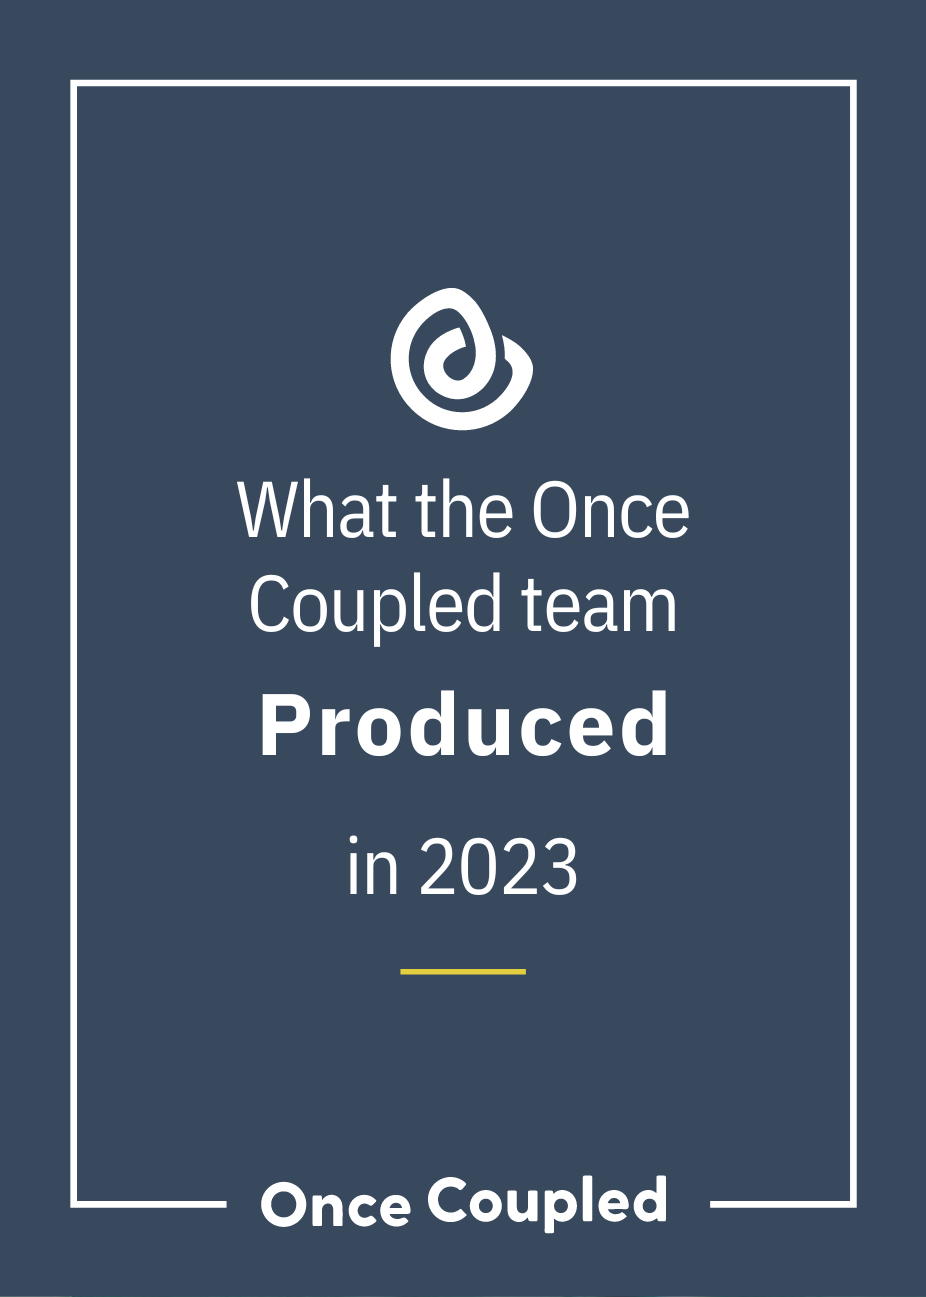 What the Once Coupled team produced in 2023